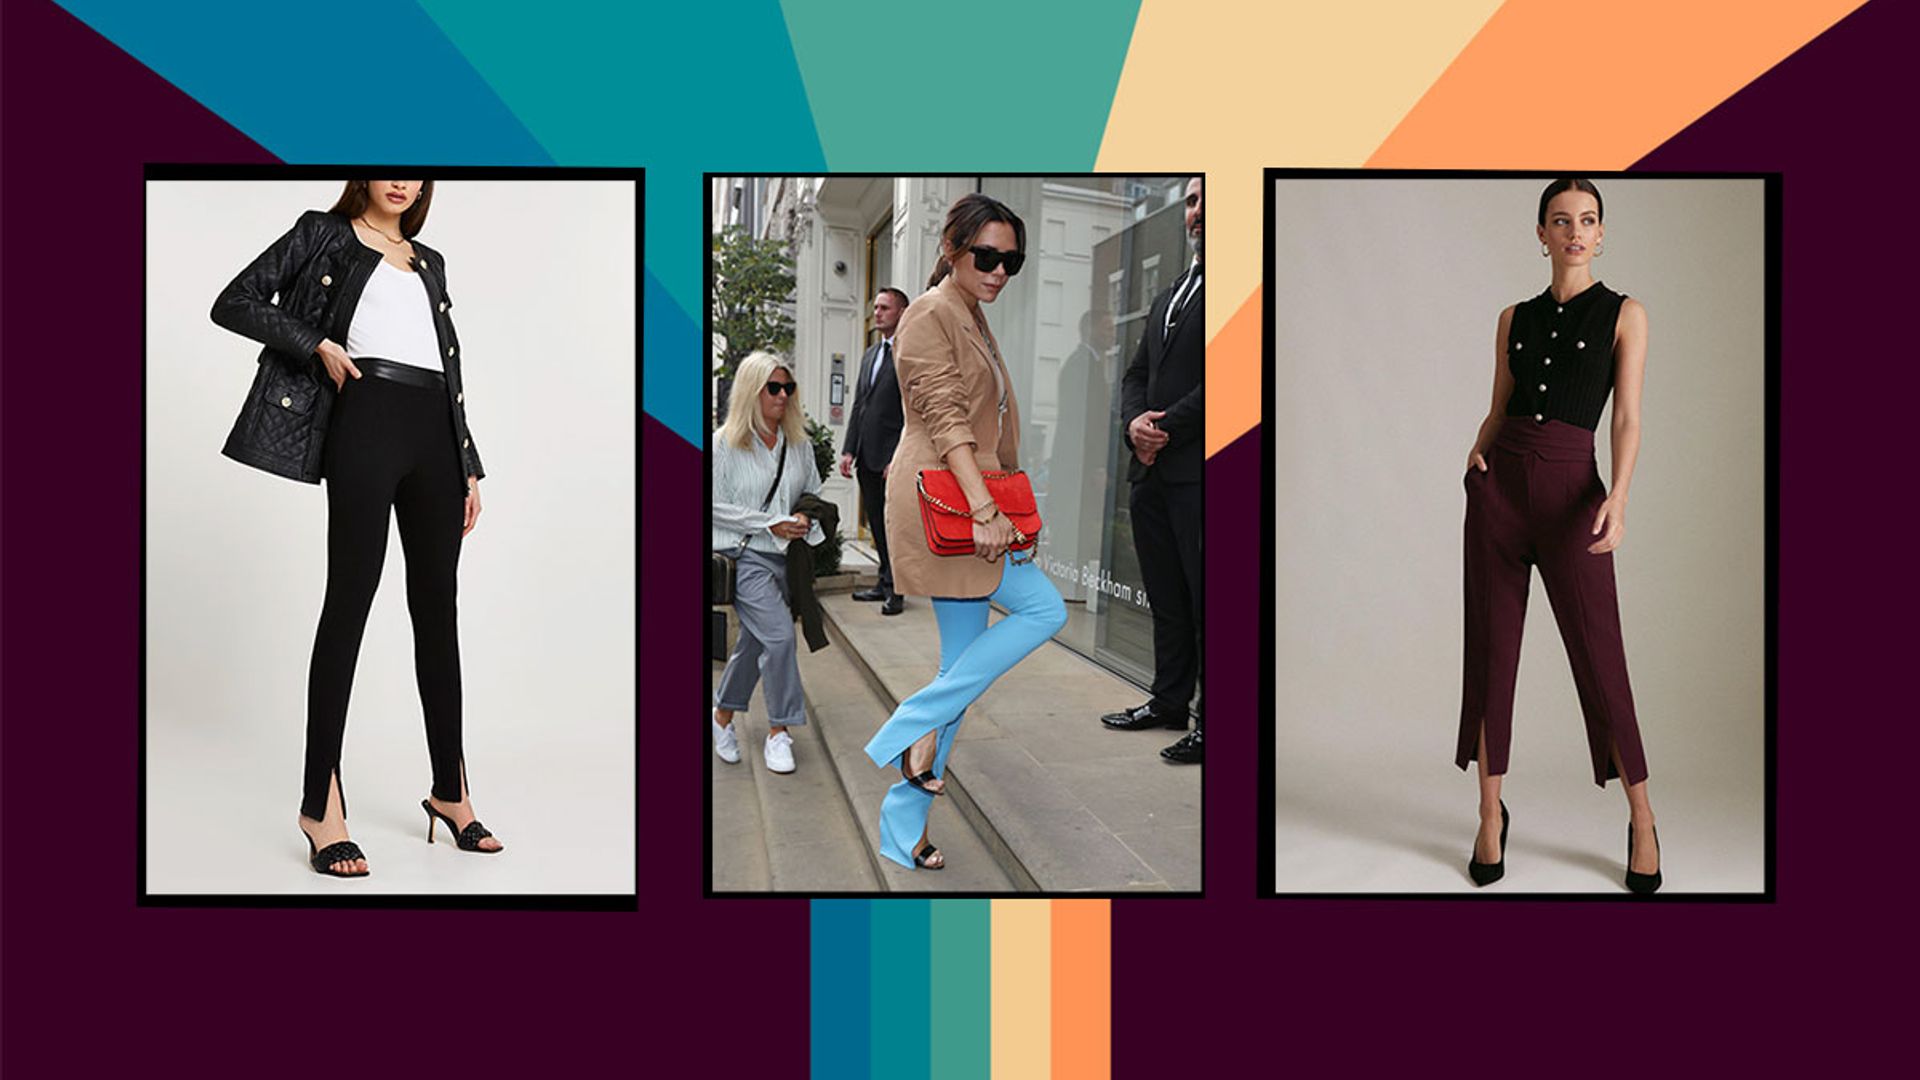 Stylish split-front trousers are trending for autumn - it's the